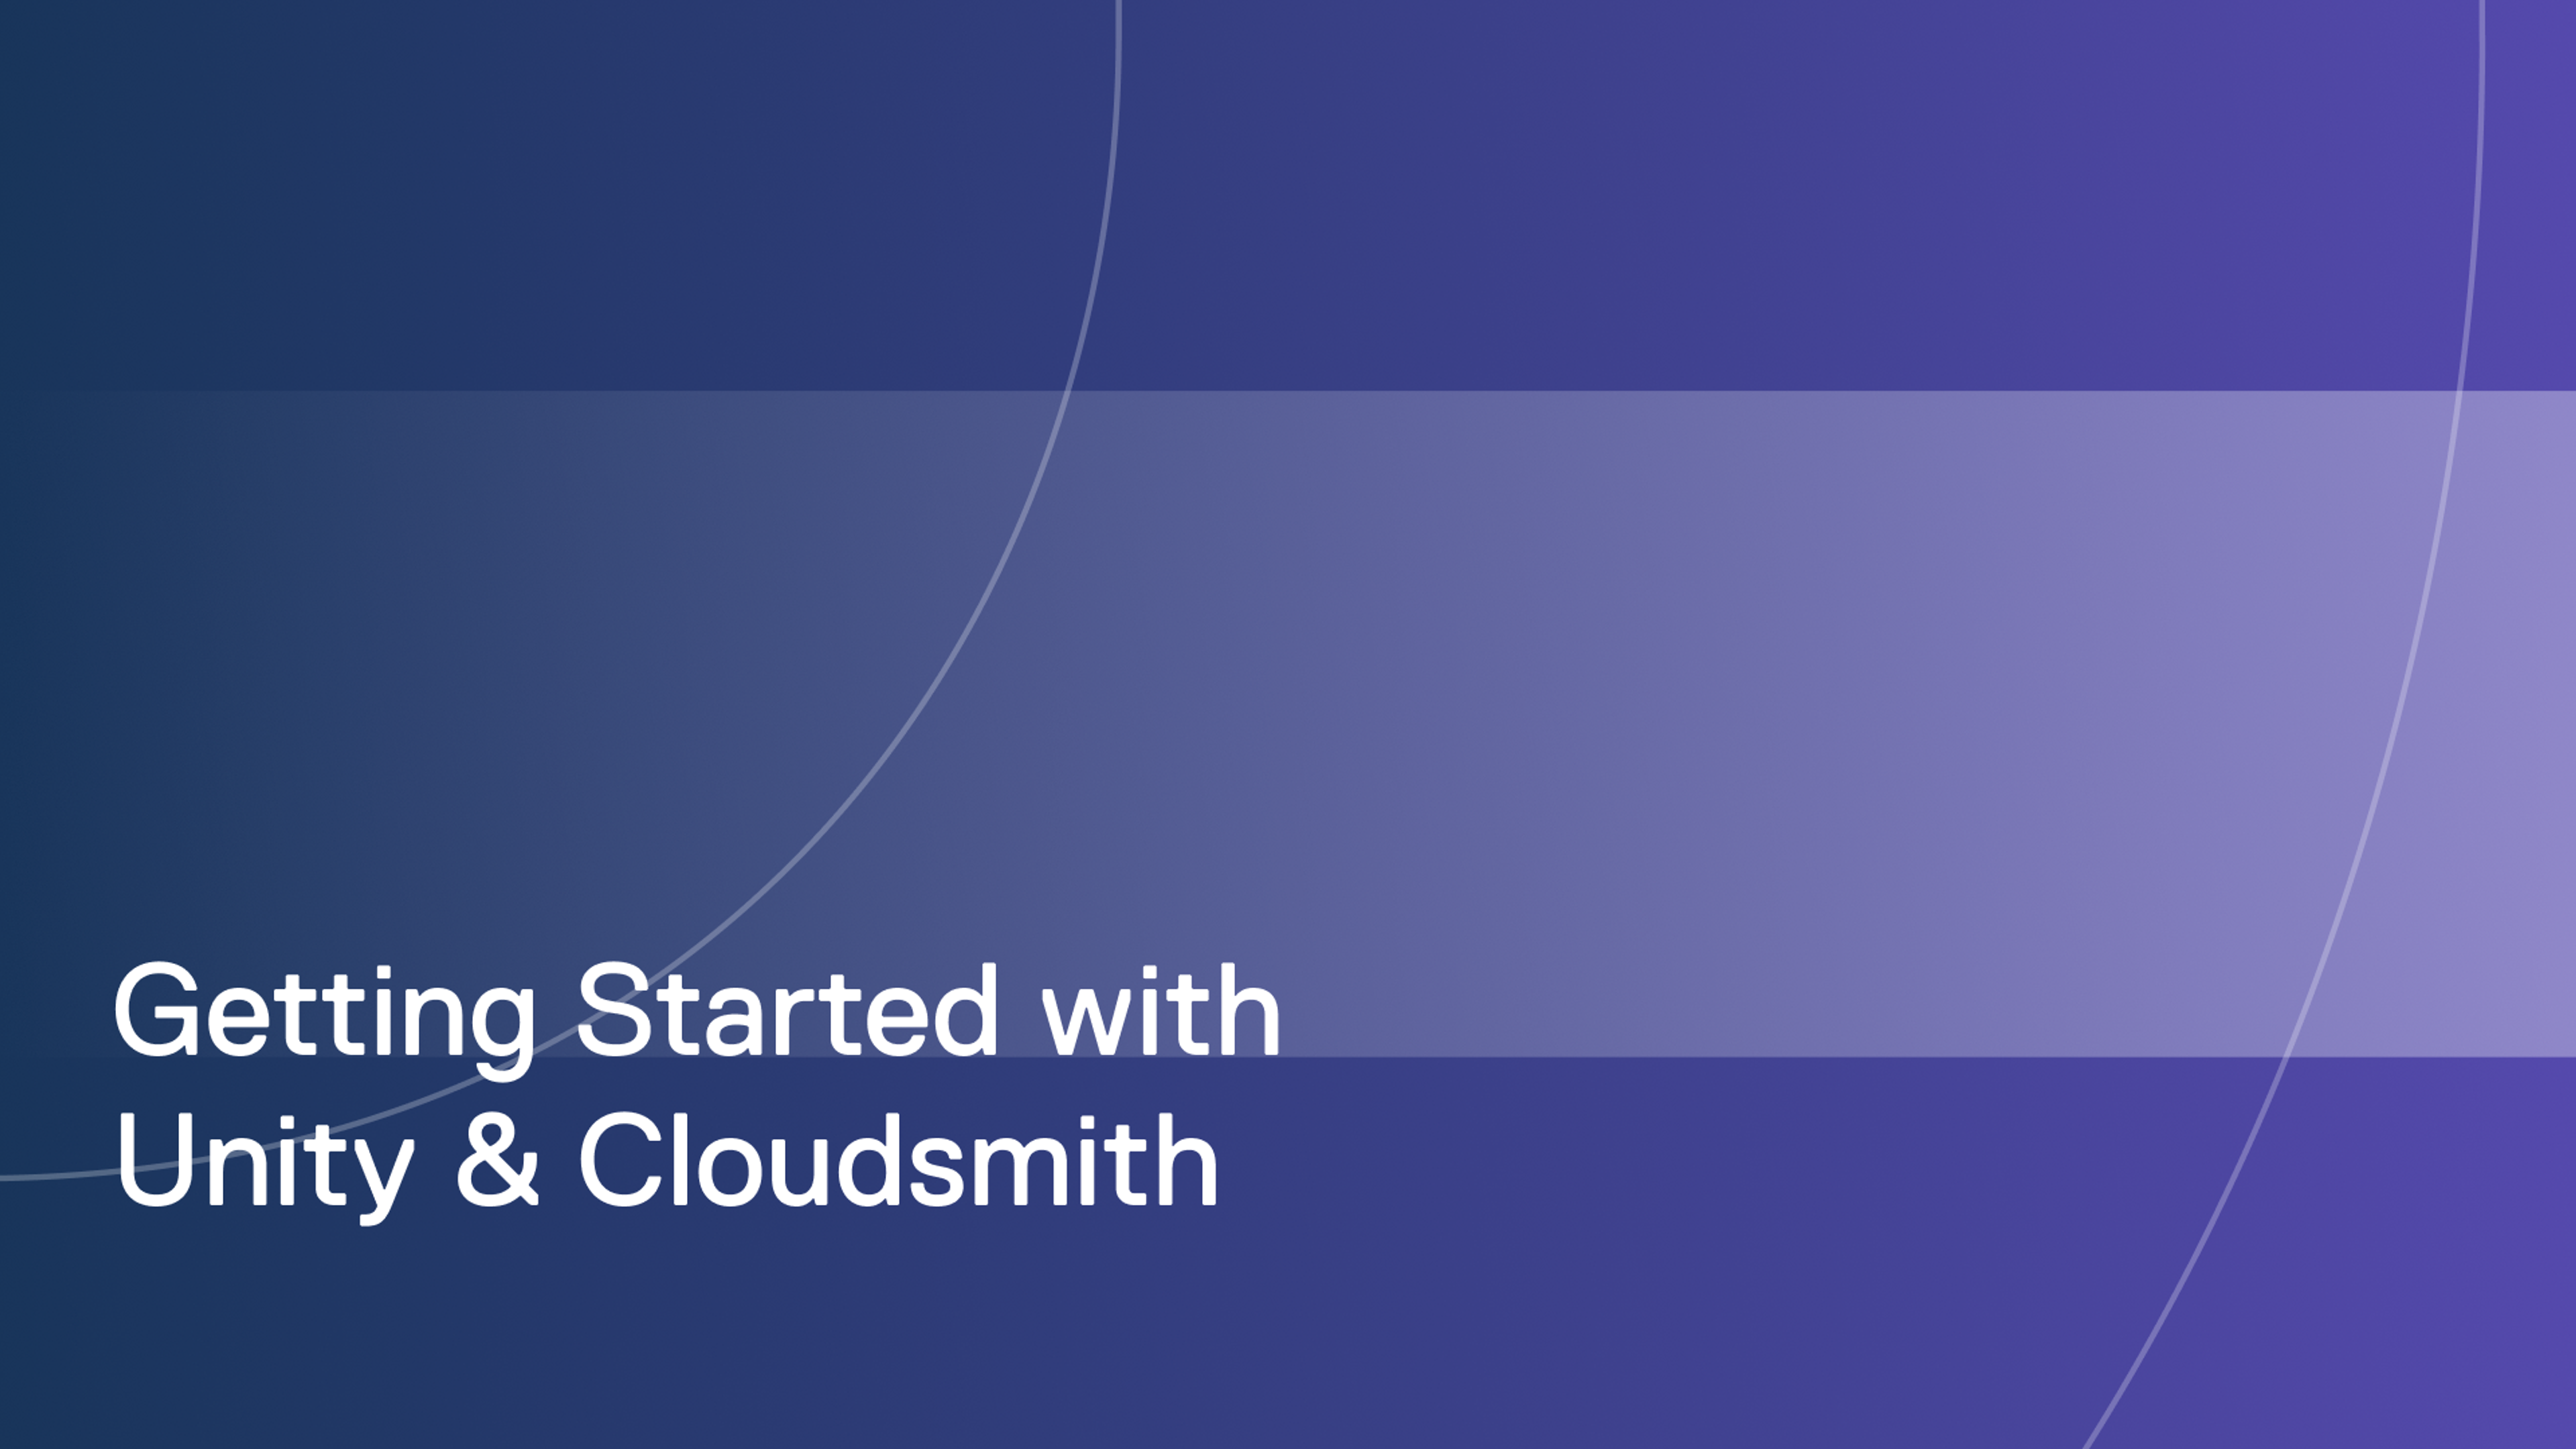 Getting started with Unity and Cloudsmith